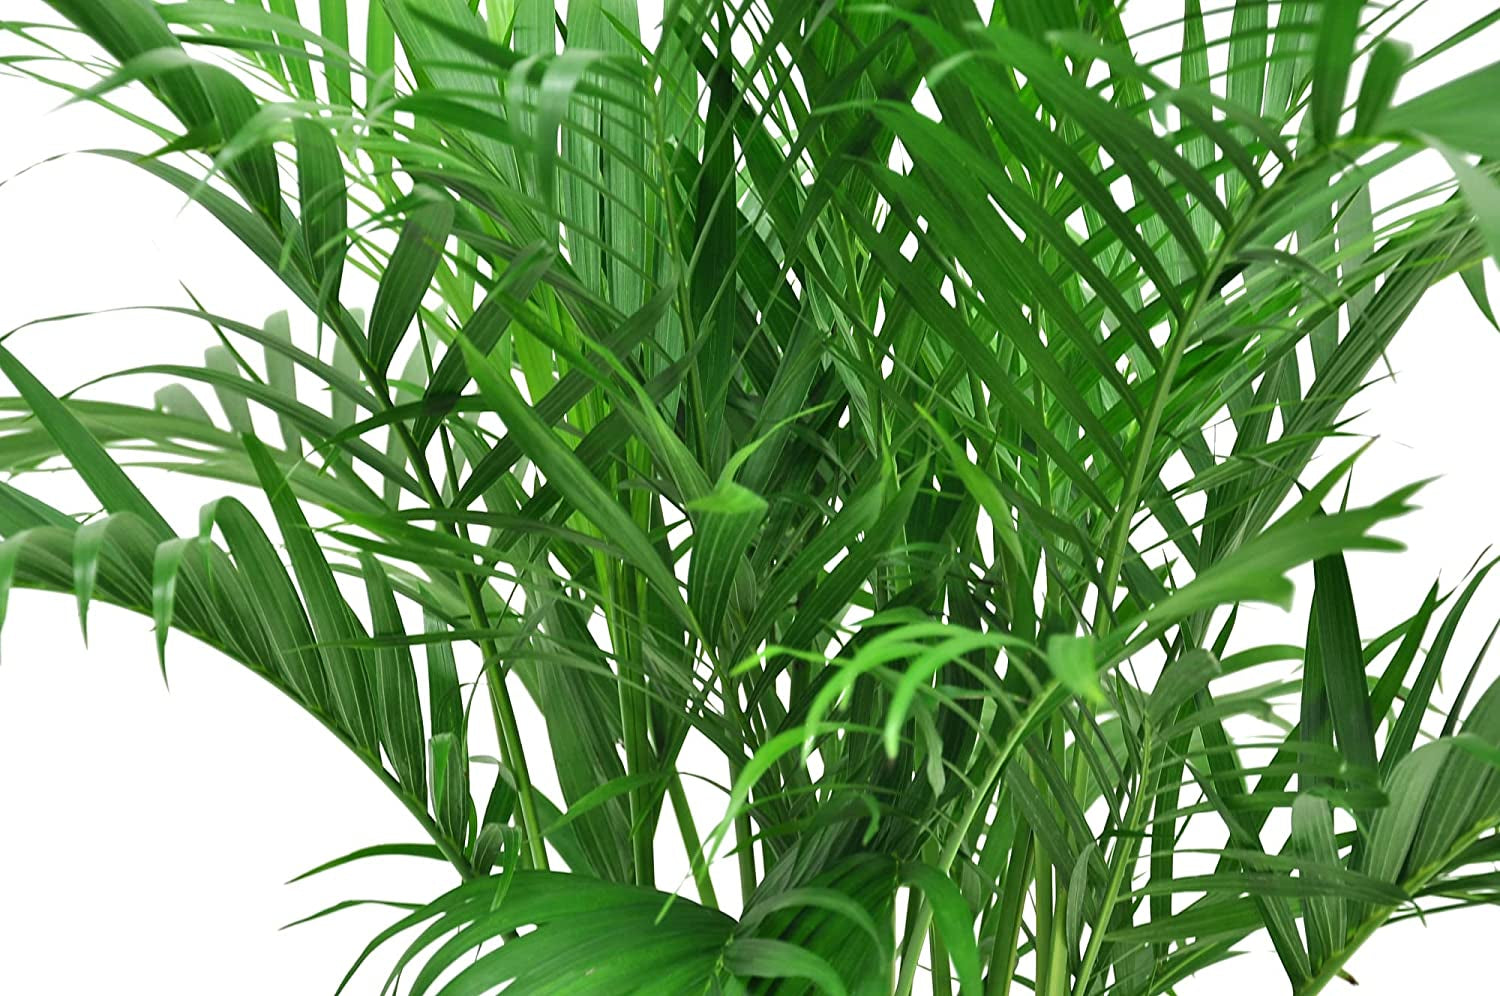 Cat Palm, Chamaedorea Palm Tree, Live Indoor Plant, 3 to 4-Feet Tall, Ships with Décor Planter, Fresh from Our Farm, Excellent Gift